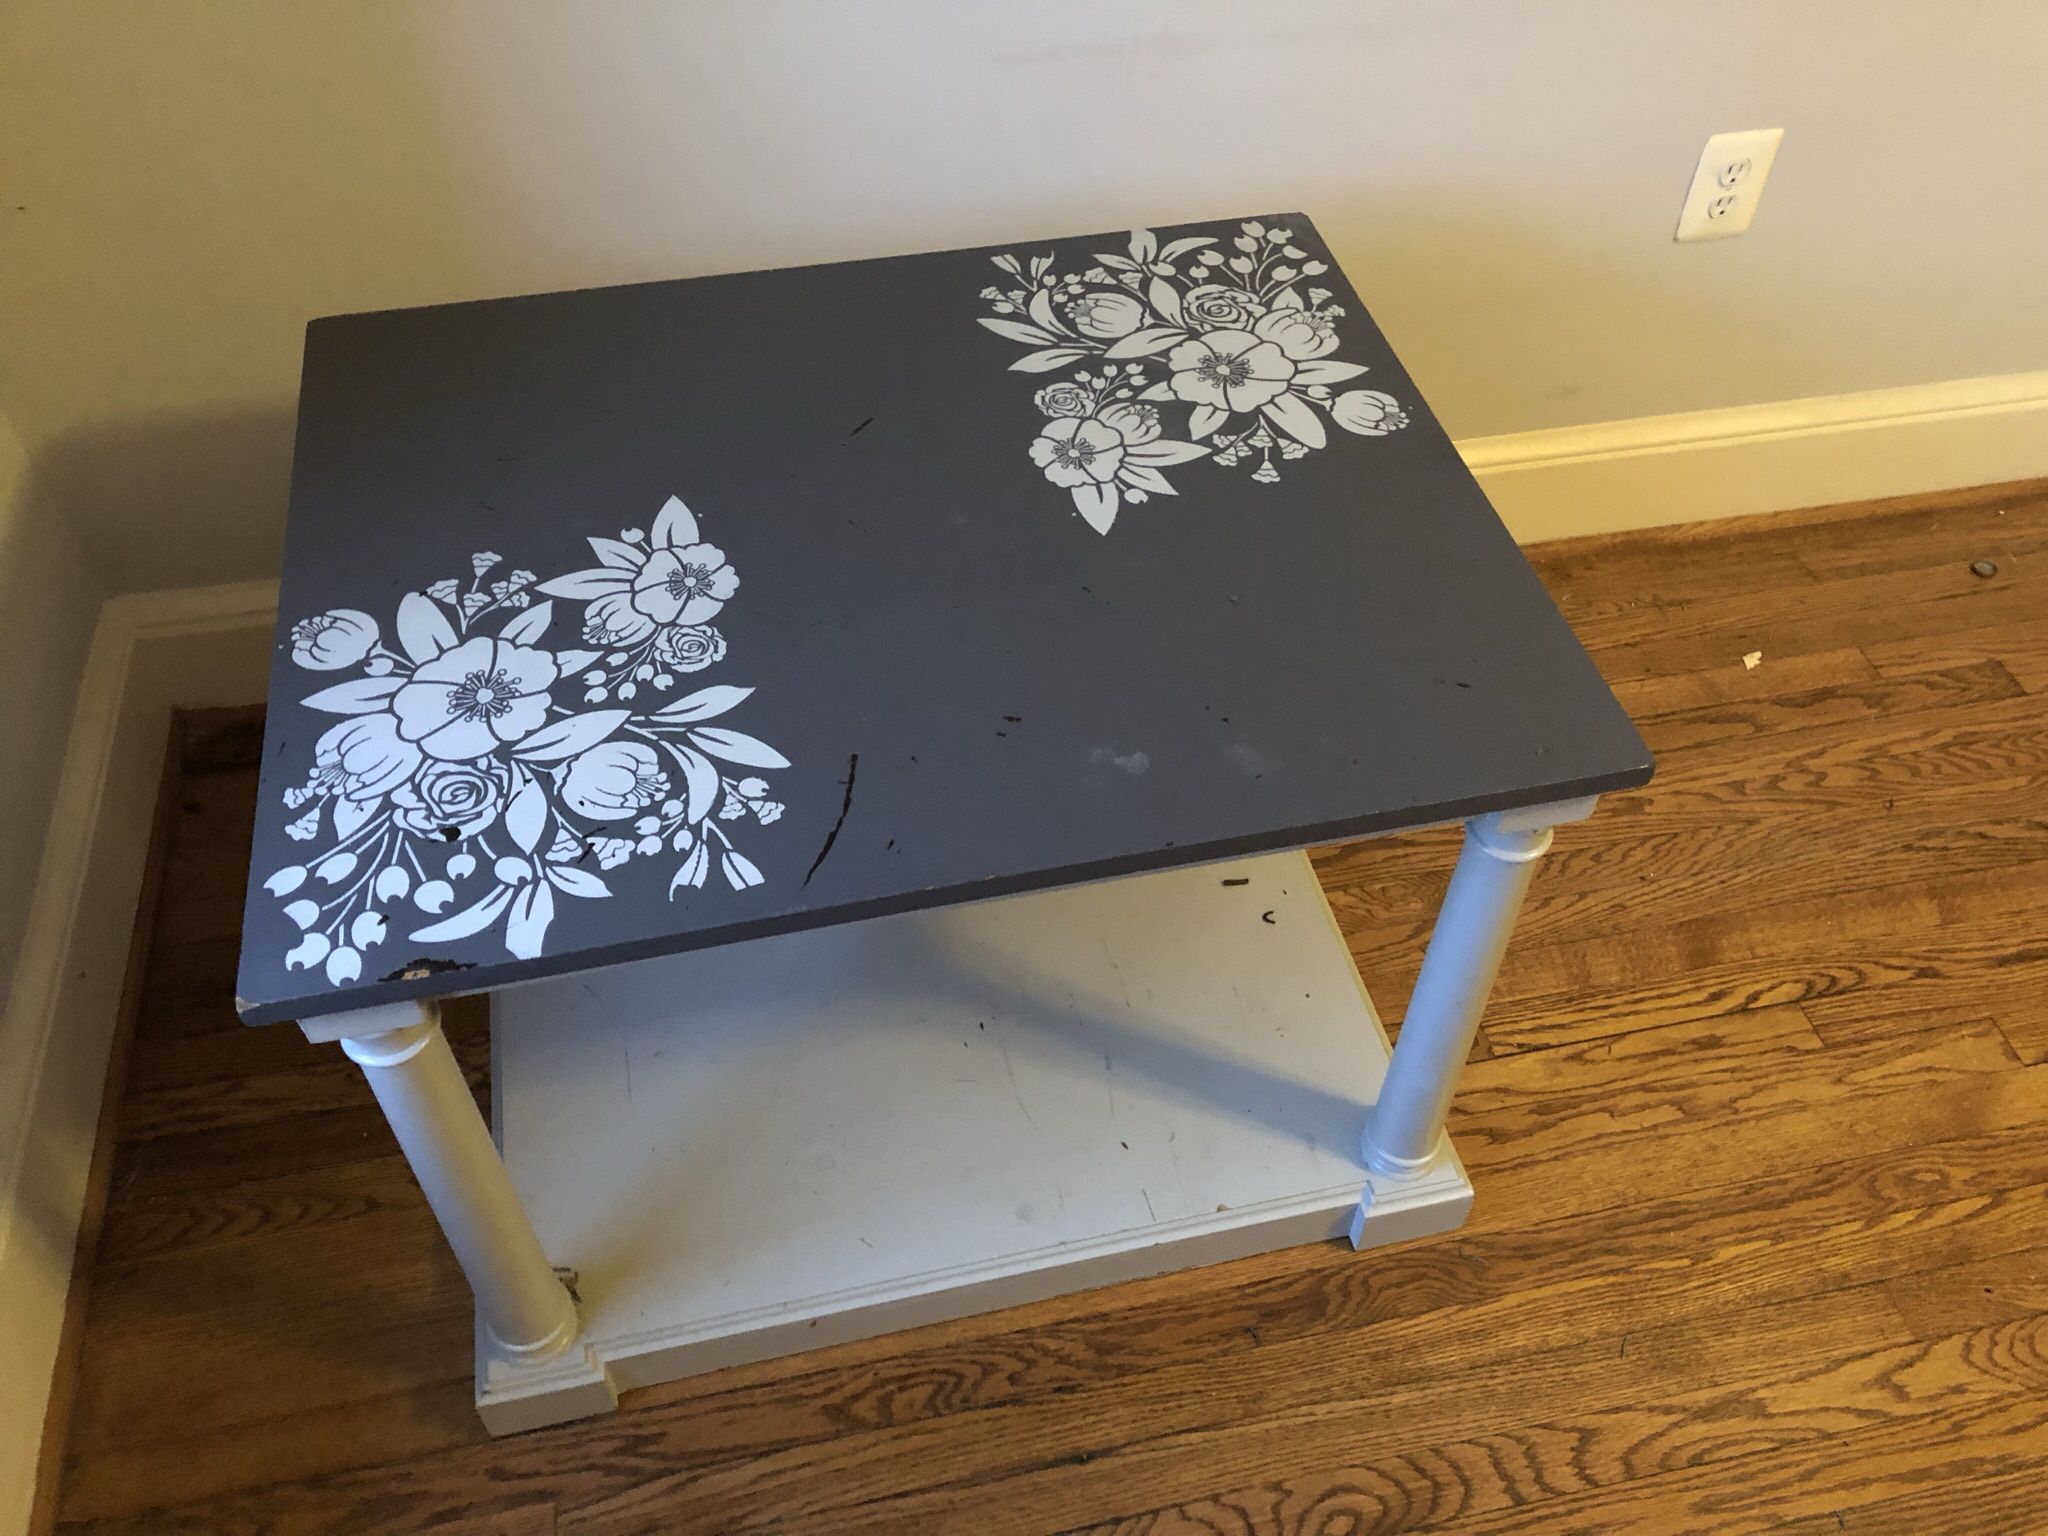 Painted End Table